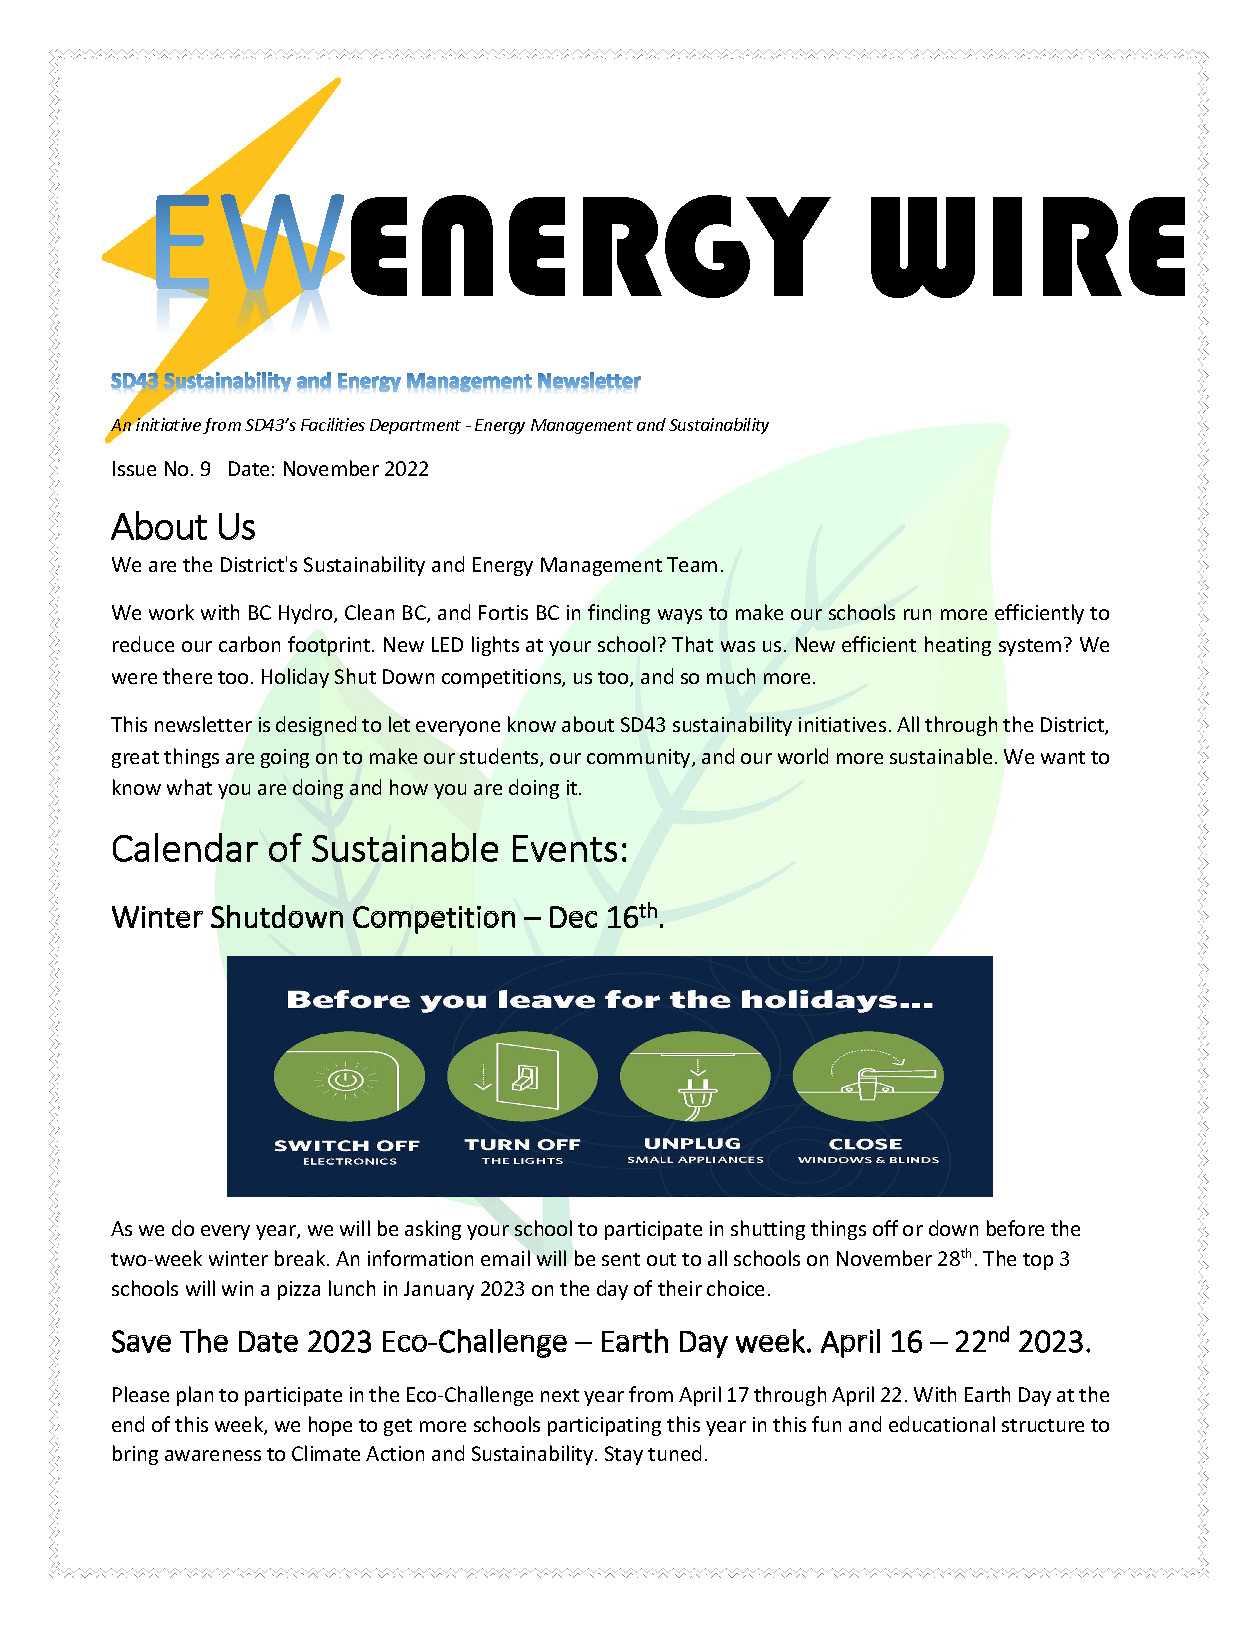 Energy Wire Newsletter November 2022_Page_1.jpg